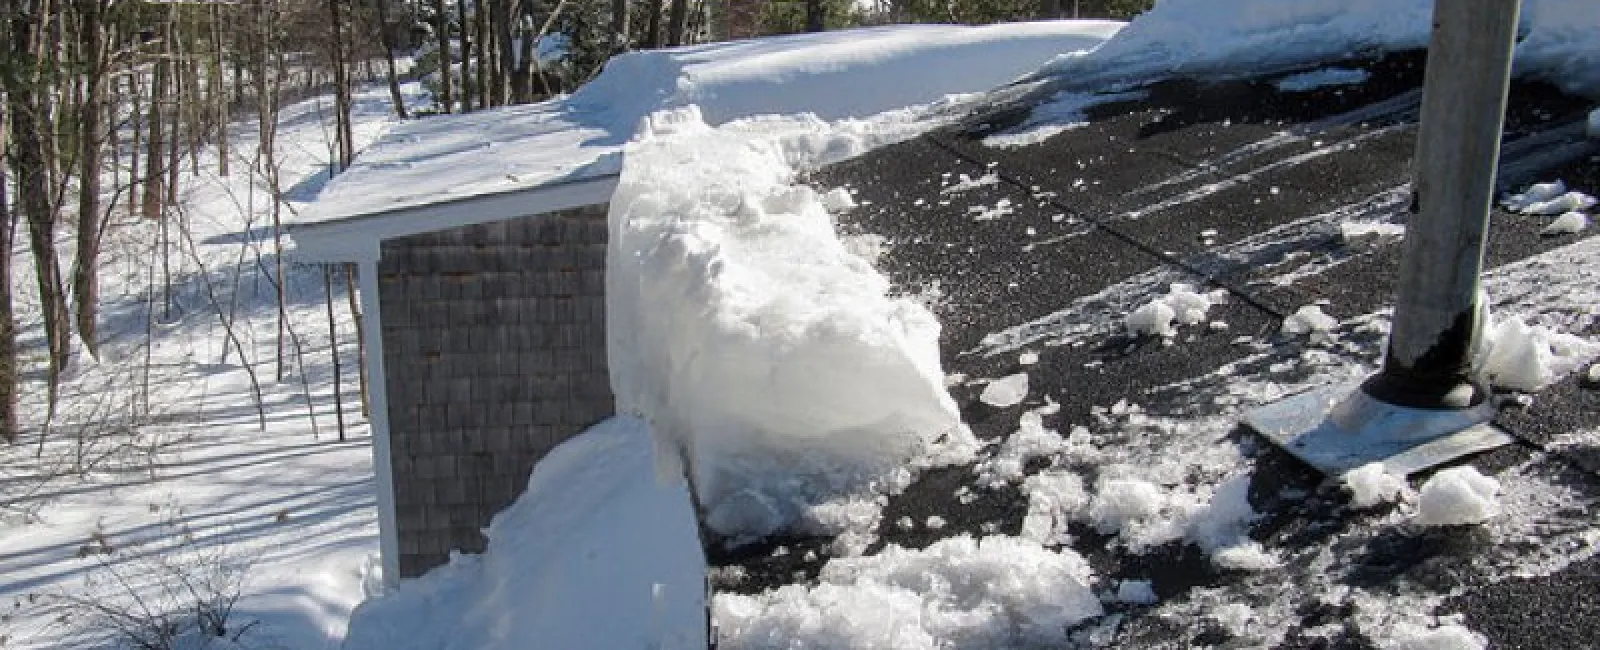 Winter Roof Problems to Watch Out For